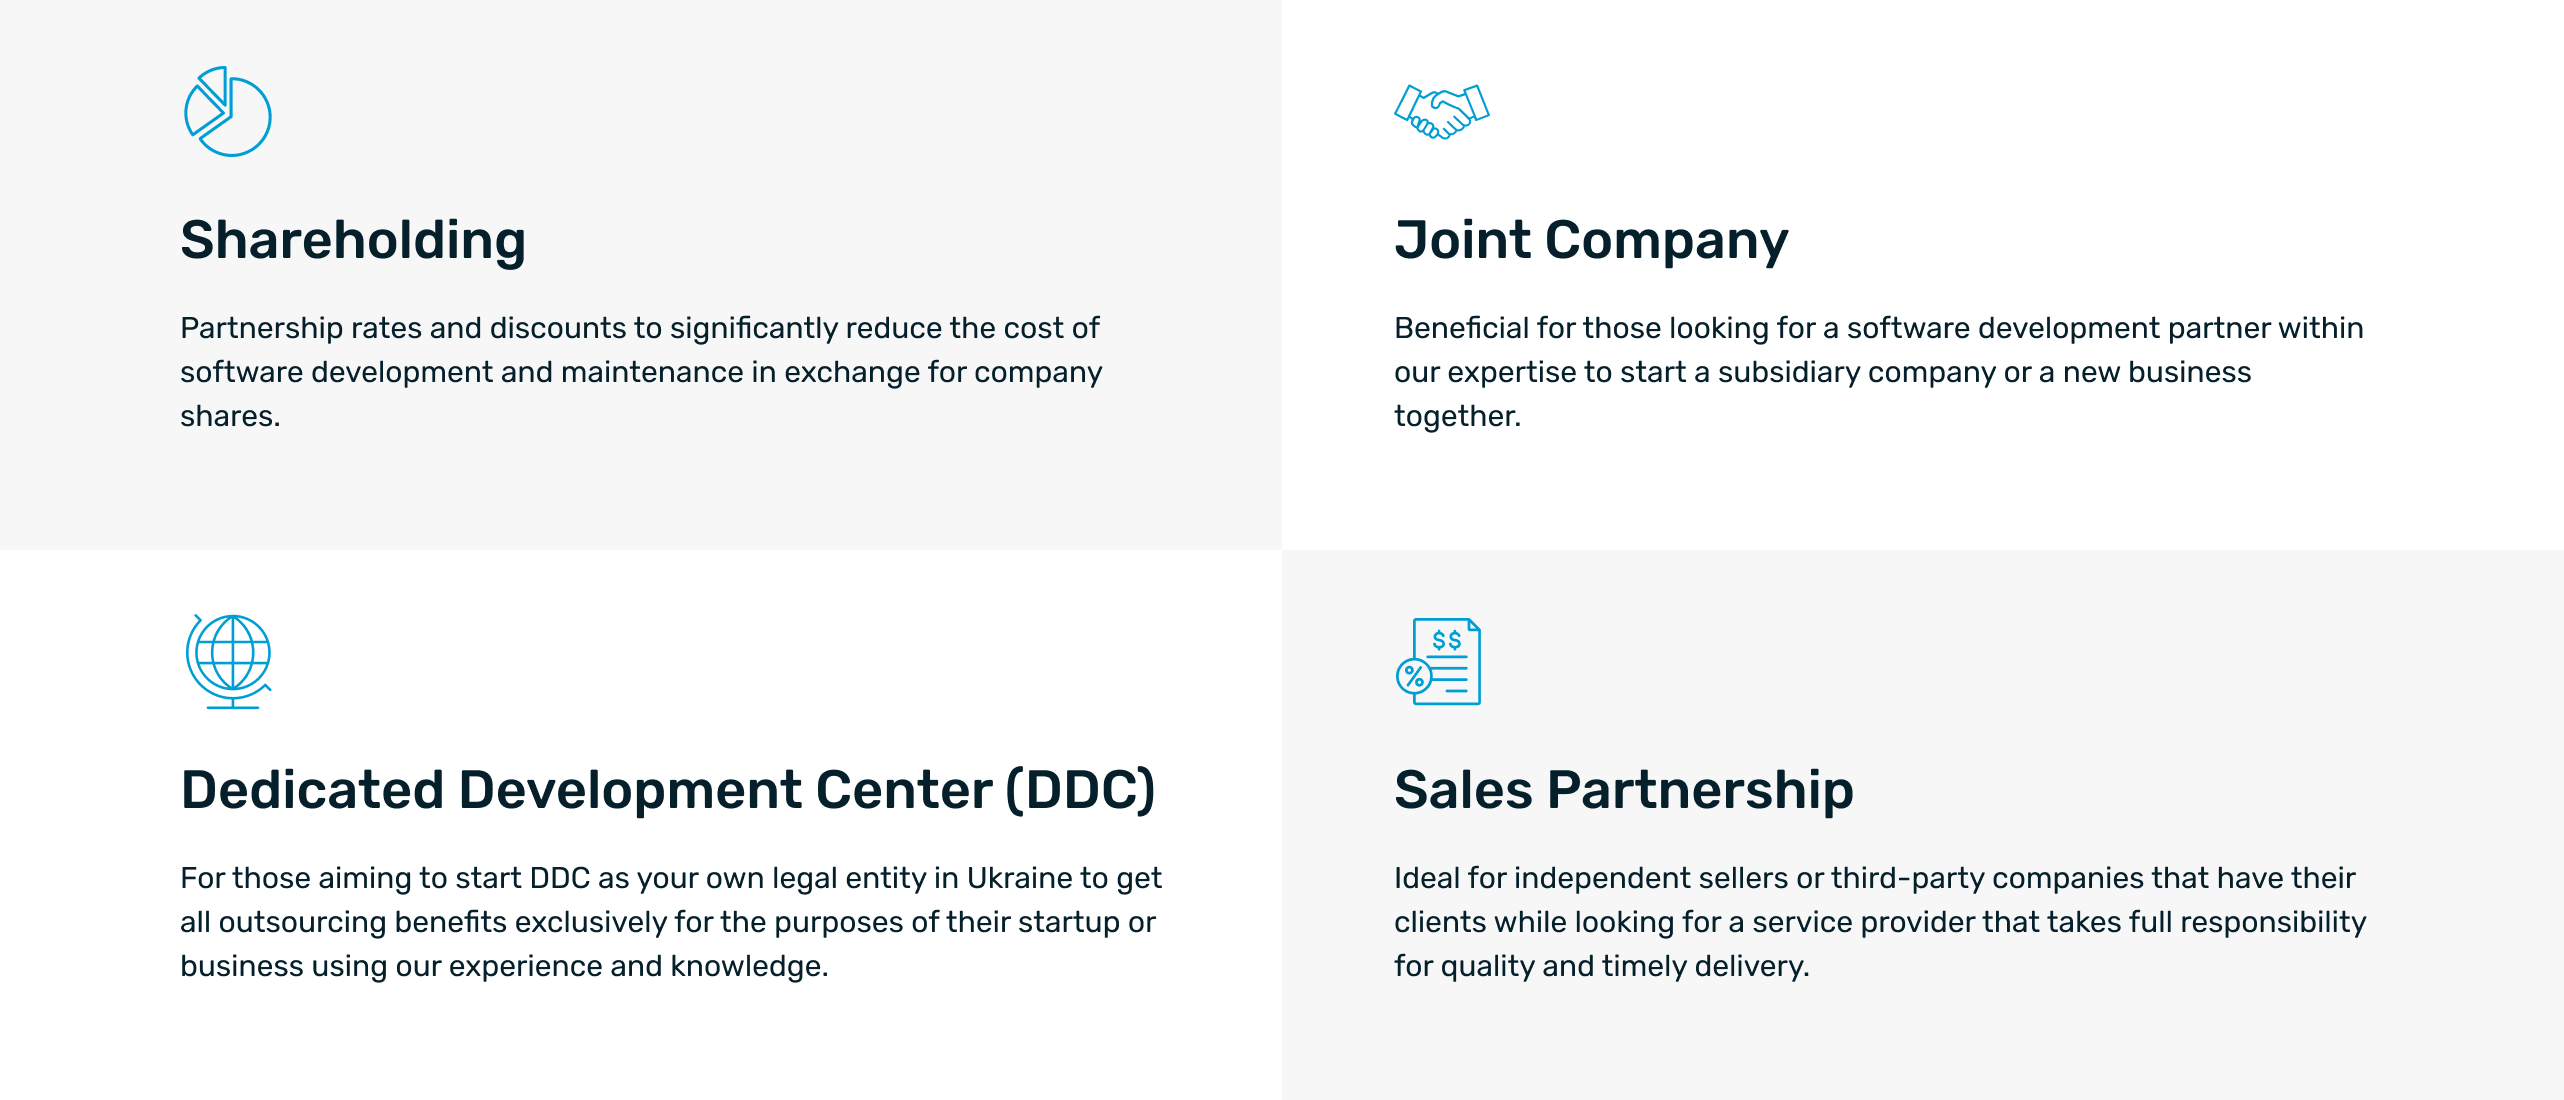 Infographic displaying different software development partnership models including Shareholding, Joint Company, Dedicated Development Center (DDC), and Sales Partnership, each offering unique benefits and collaboration opportunities for business growth and software innovation.